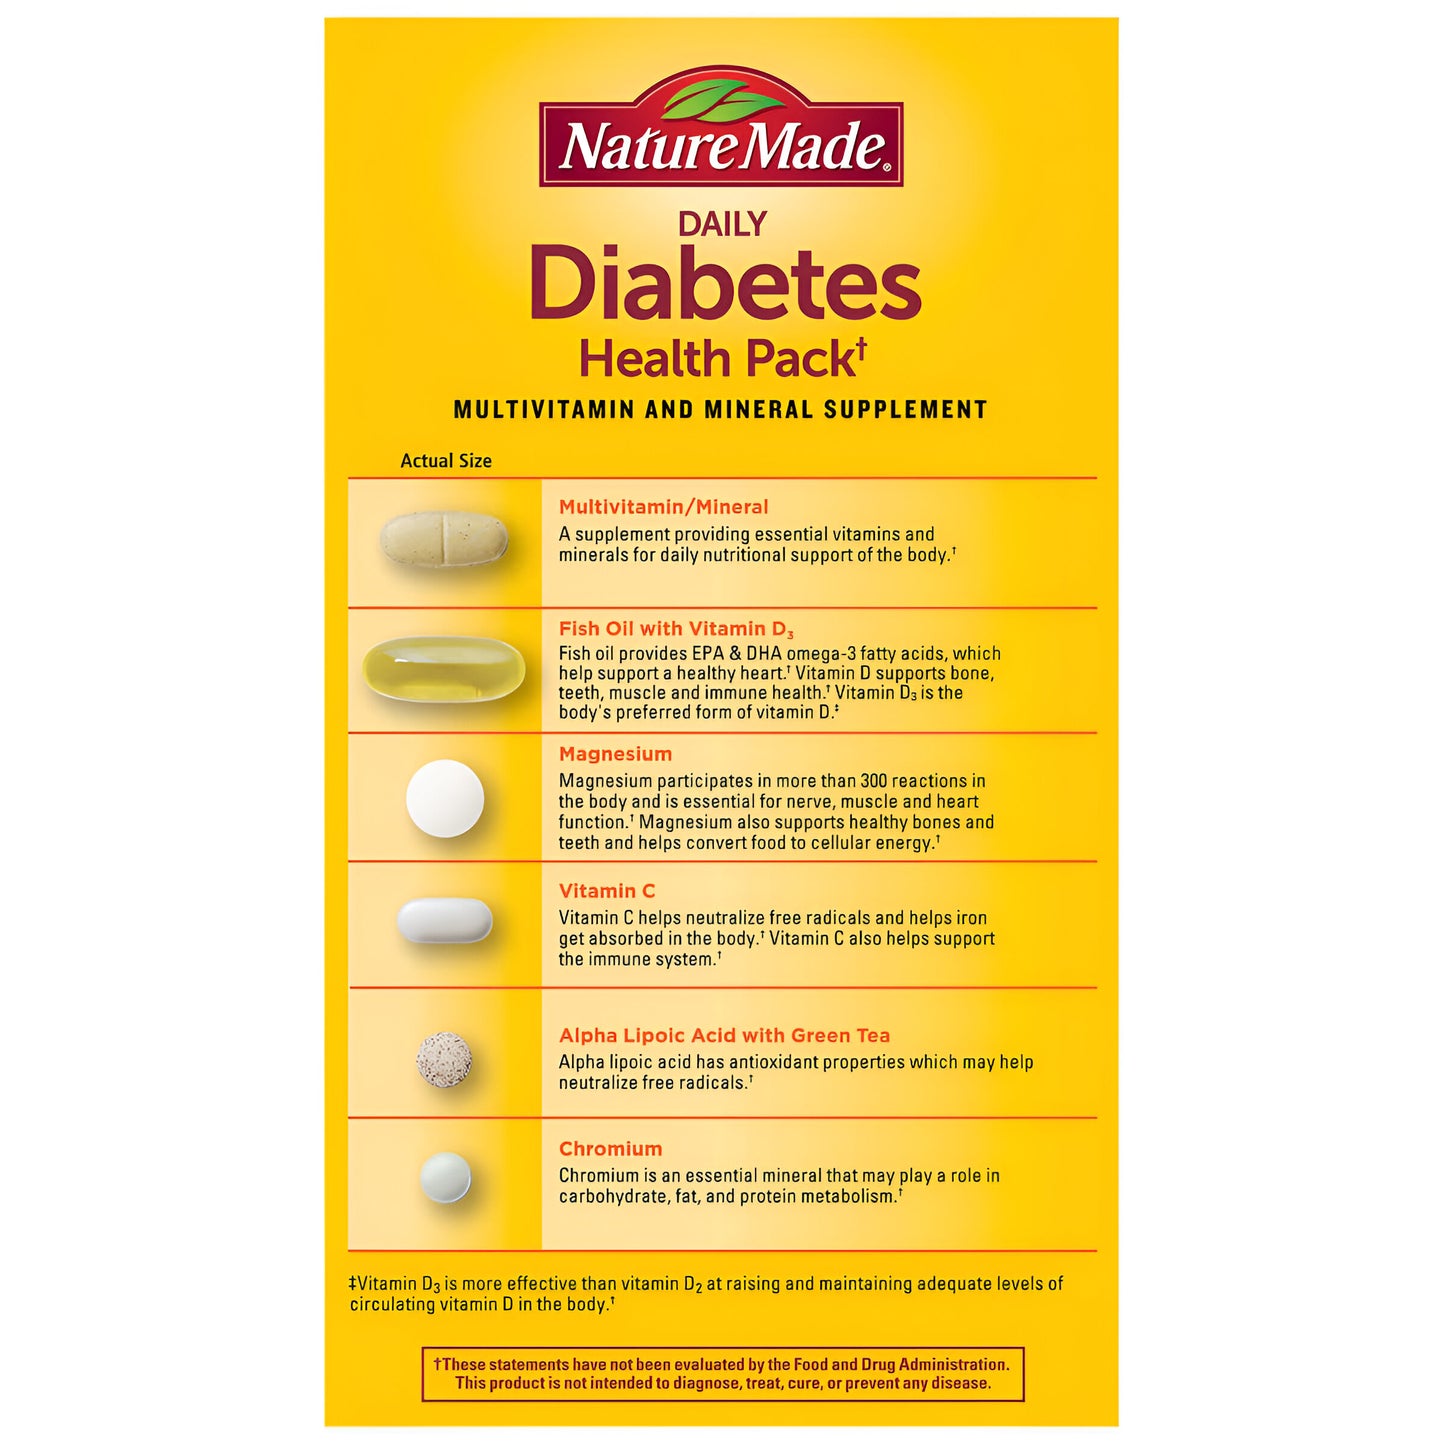 Nature Made Diabetes Health Pack, 60 Paquetes